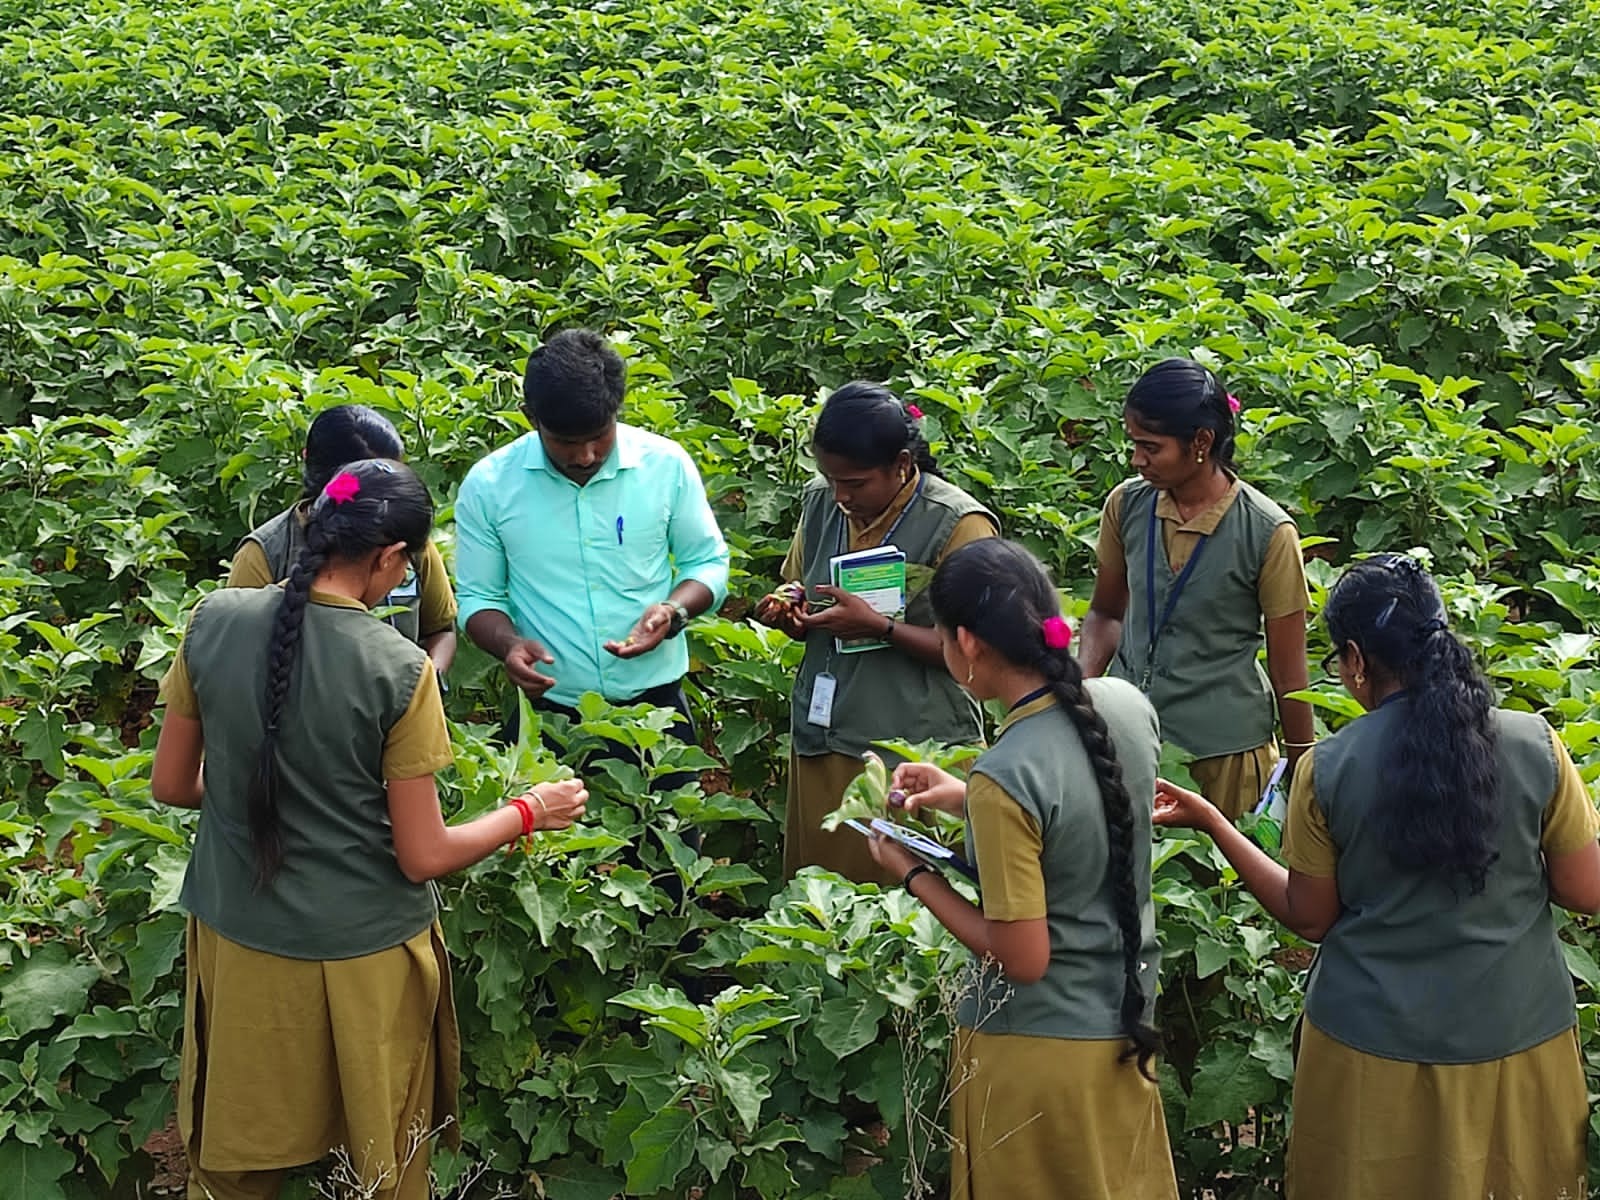 Students larva collection at Brinjal field